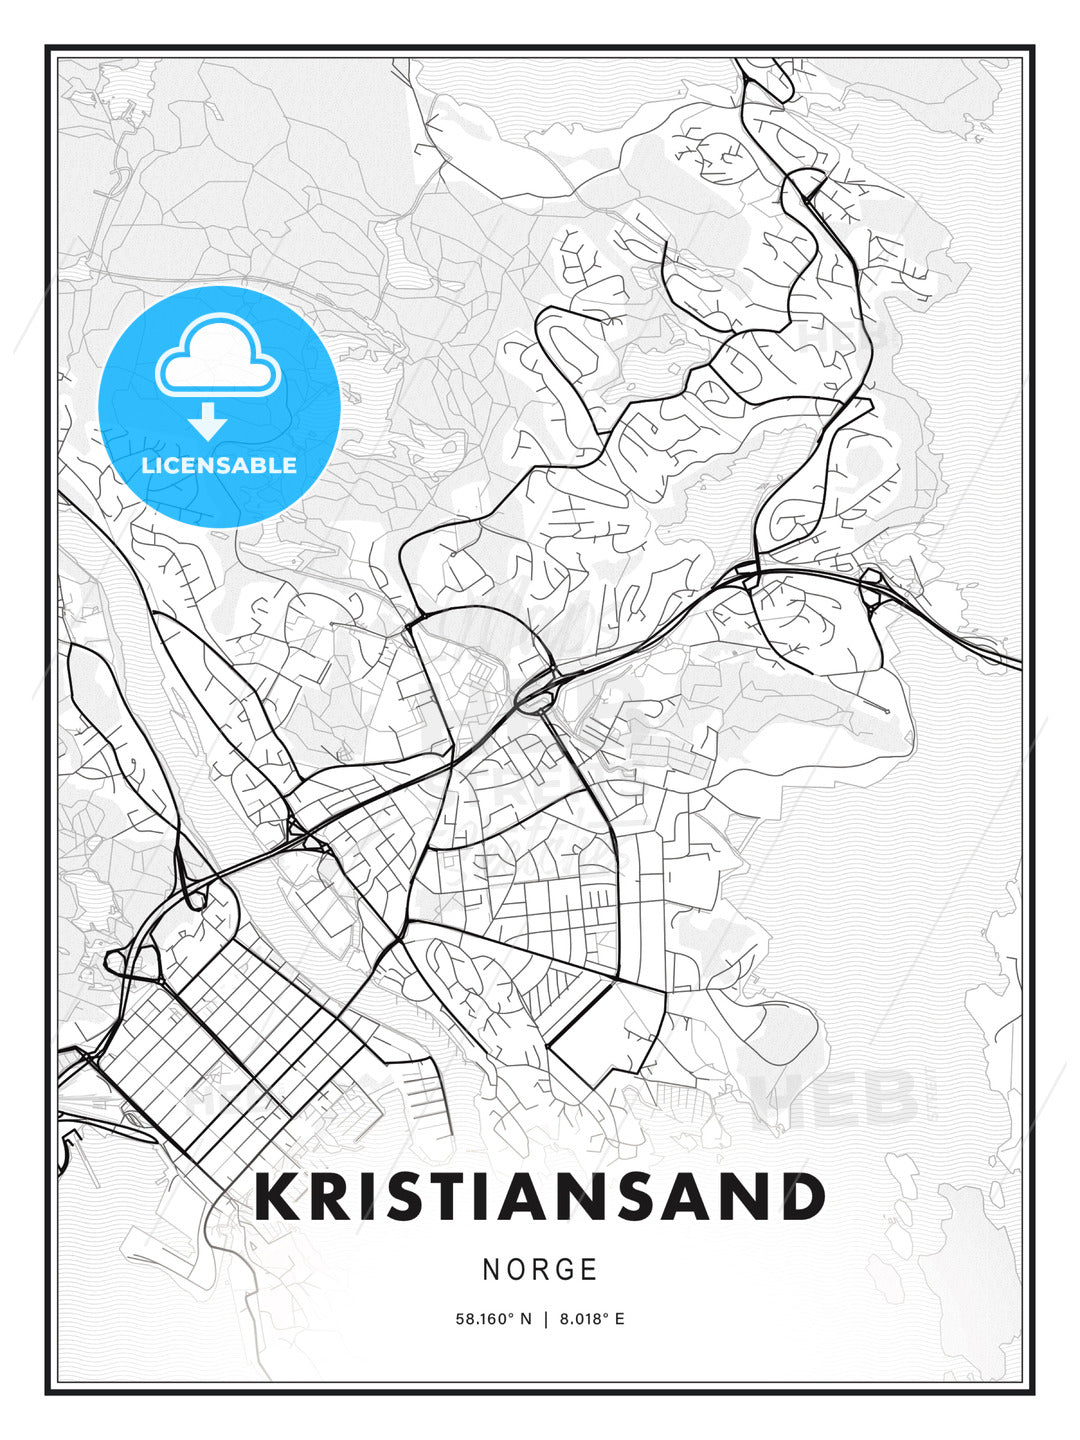 Kristiansand, Norway, Modern Print Template in Various Formats - HEBSTREITS Sketches